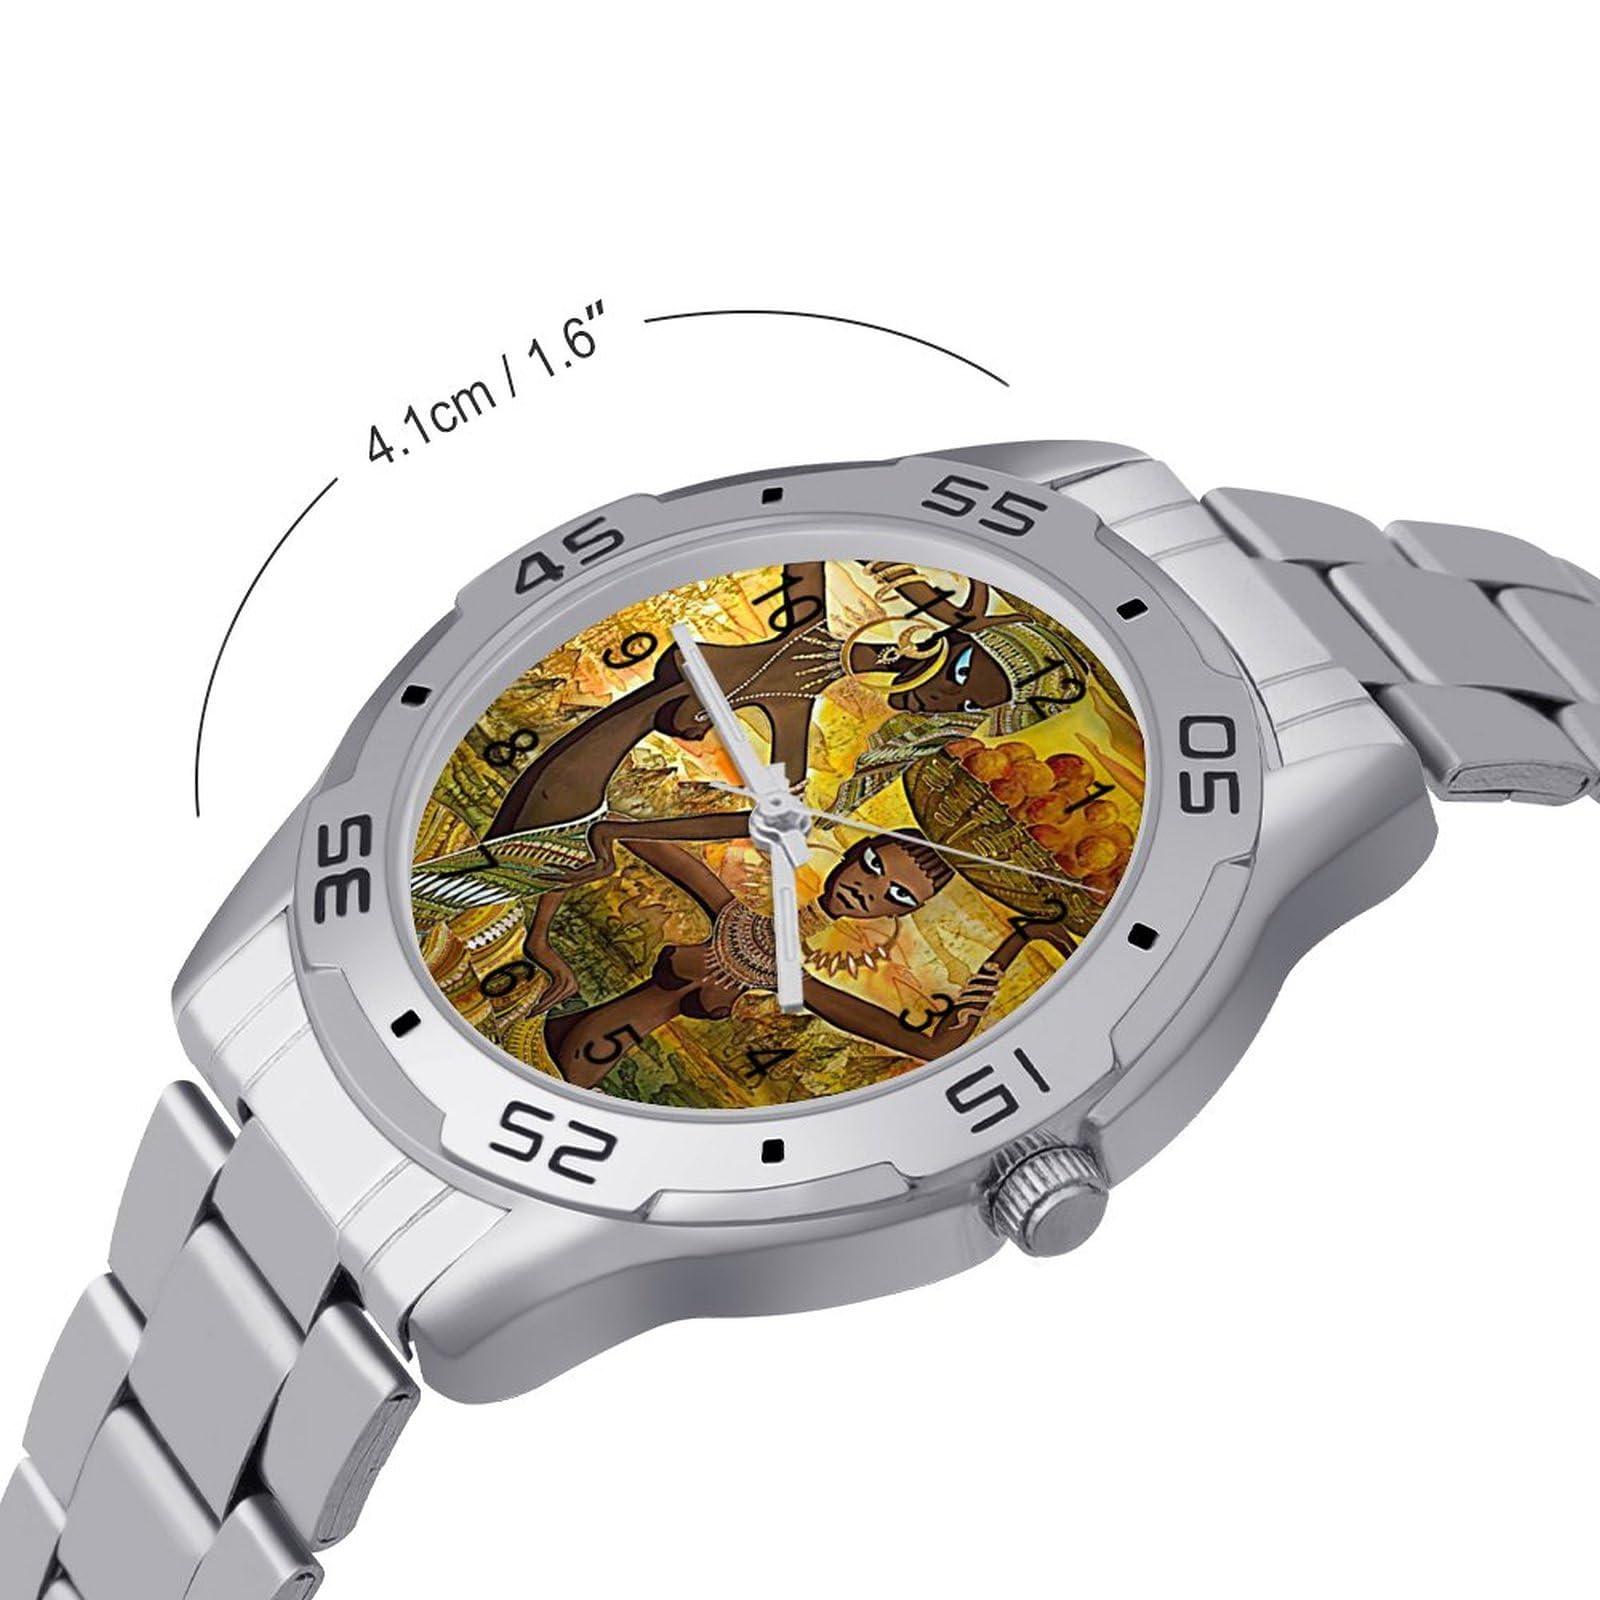 Naked African Girls Stainless Steel Band Business Watch Dress Wrist Unique Luxury Work Casual Waterproof Watches